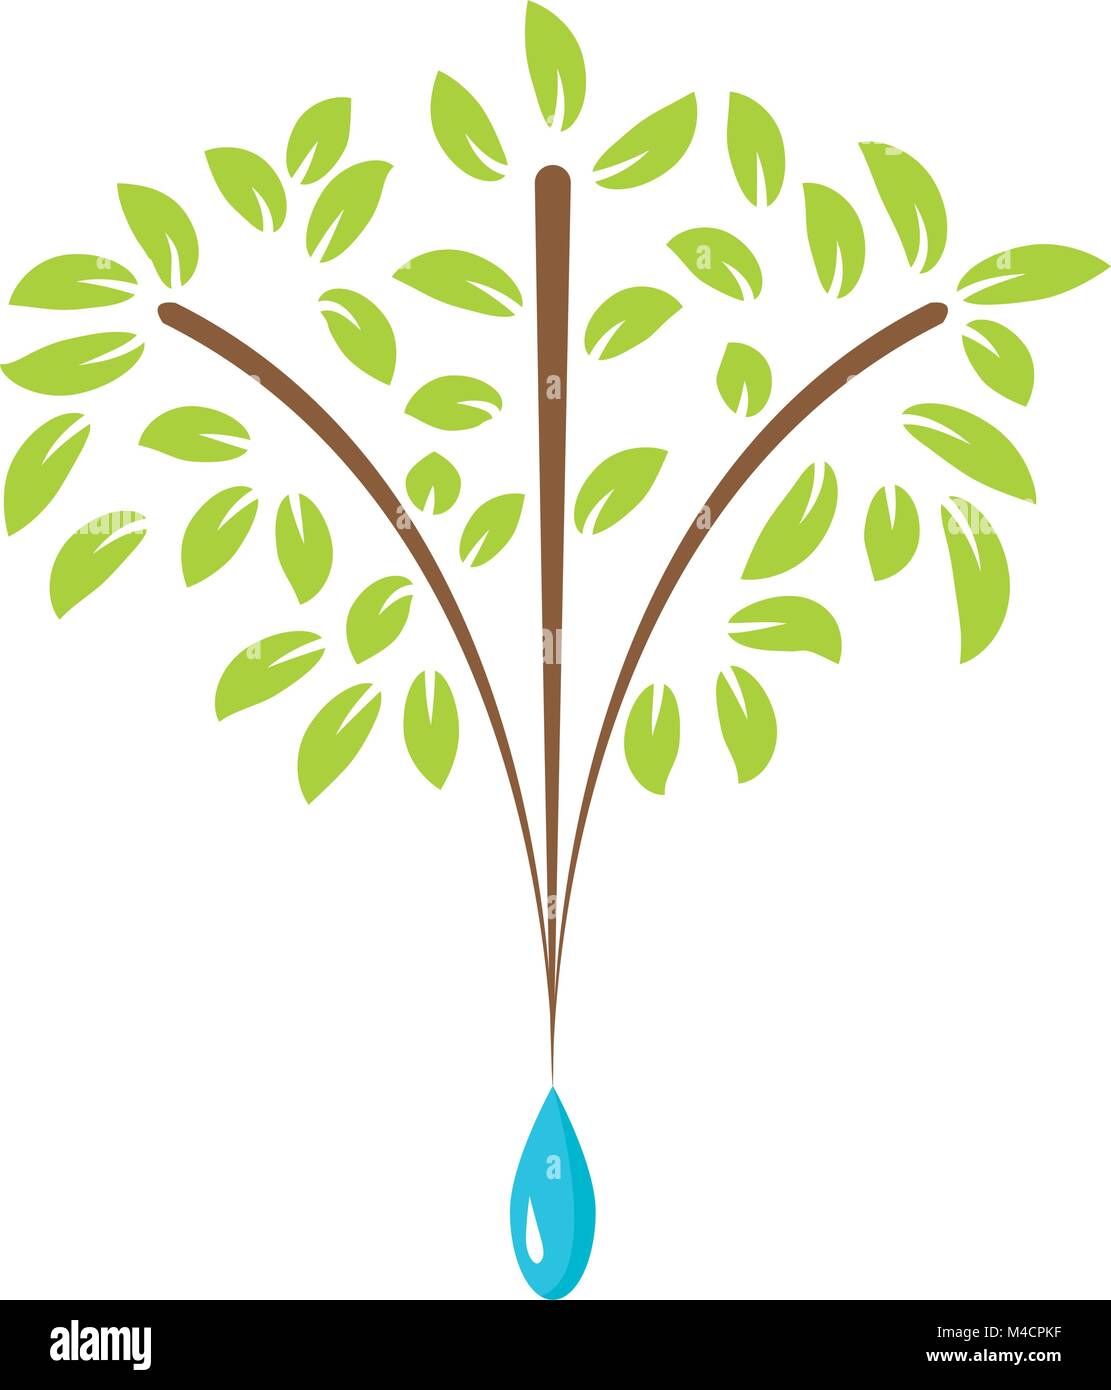 An image of a tree with drop of water representing growth. Stock Vector